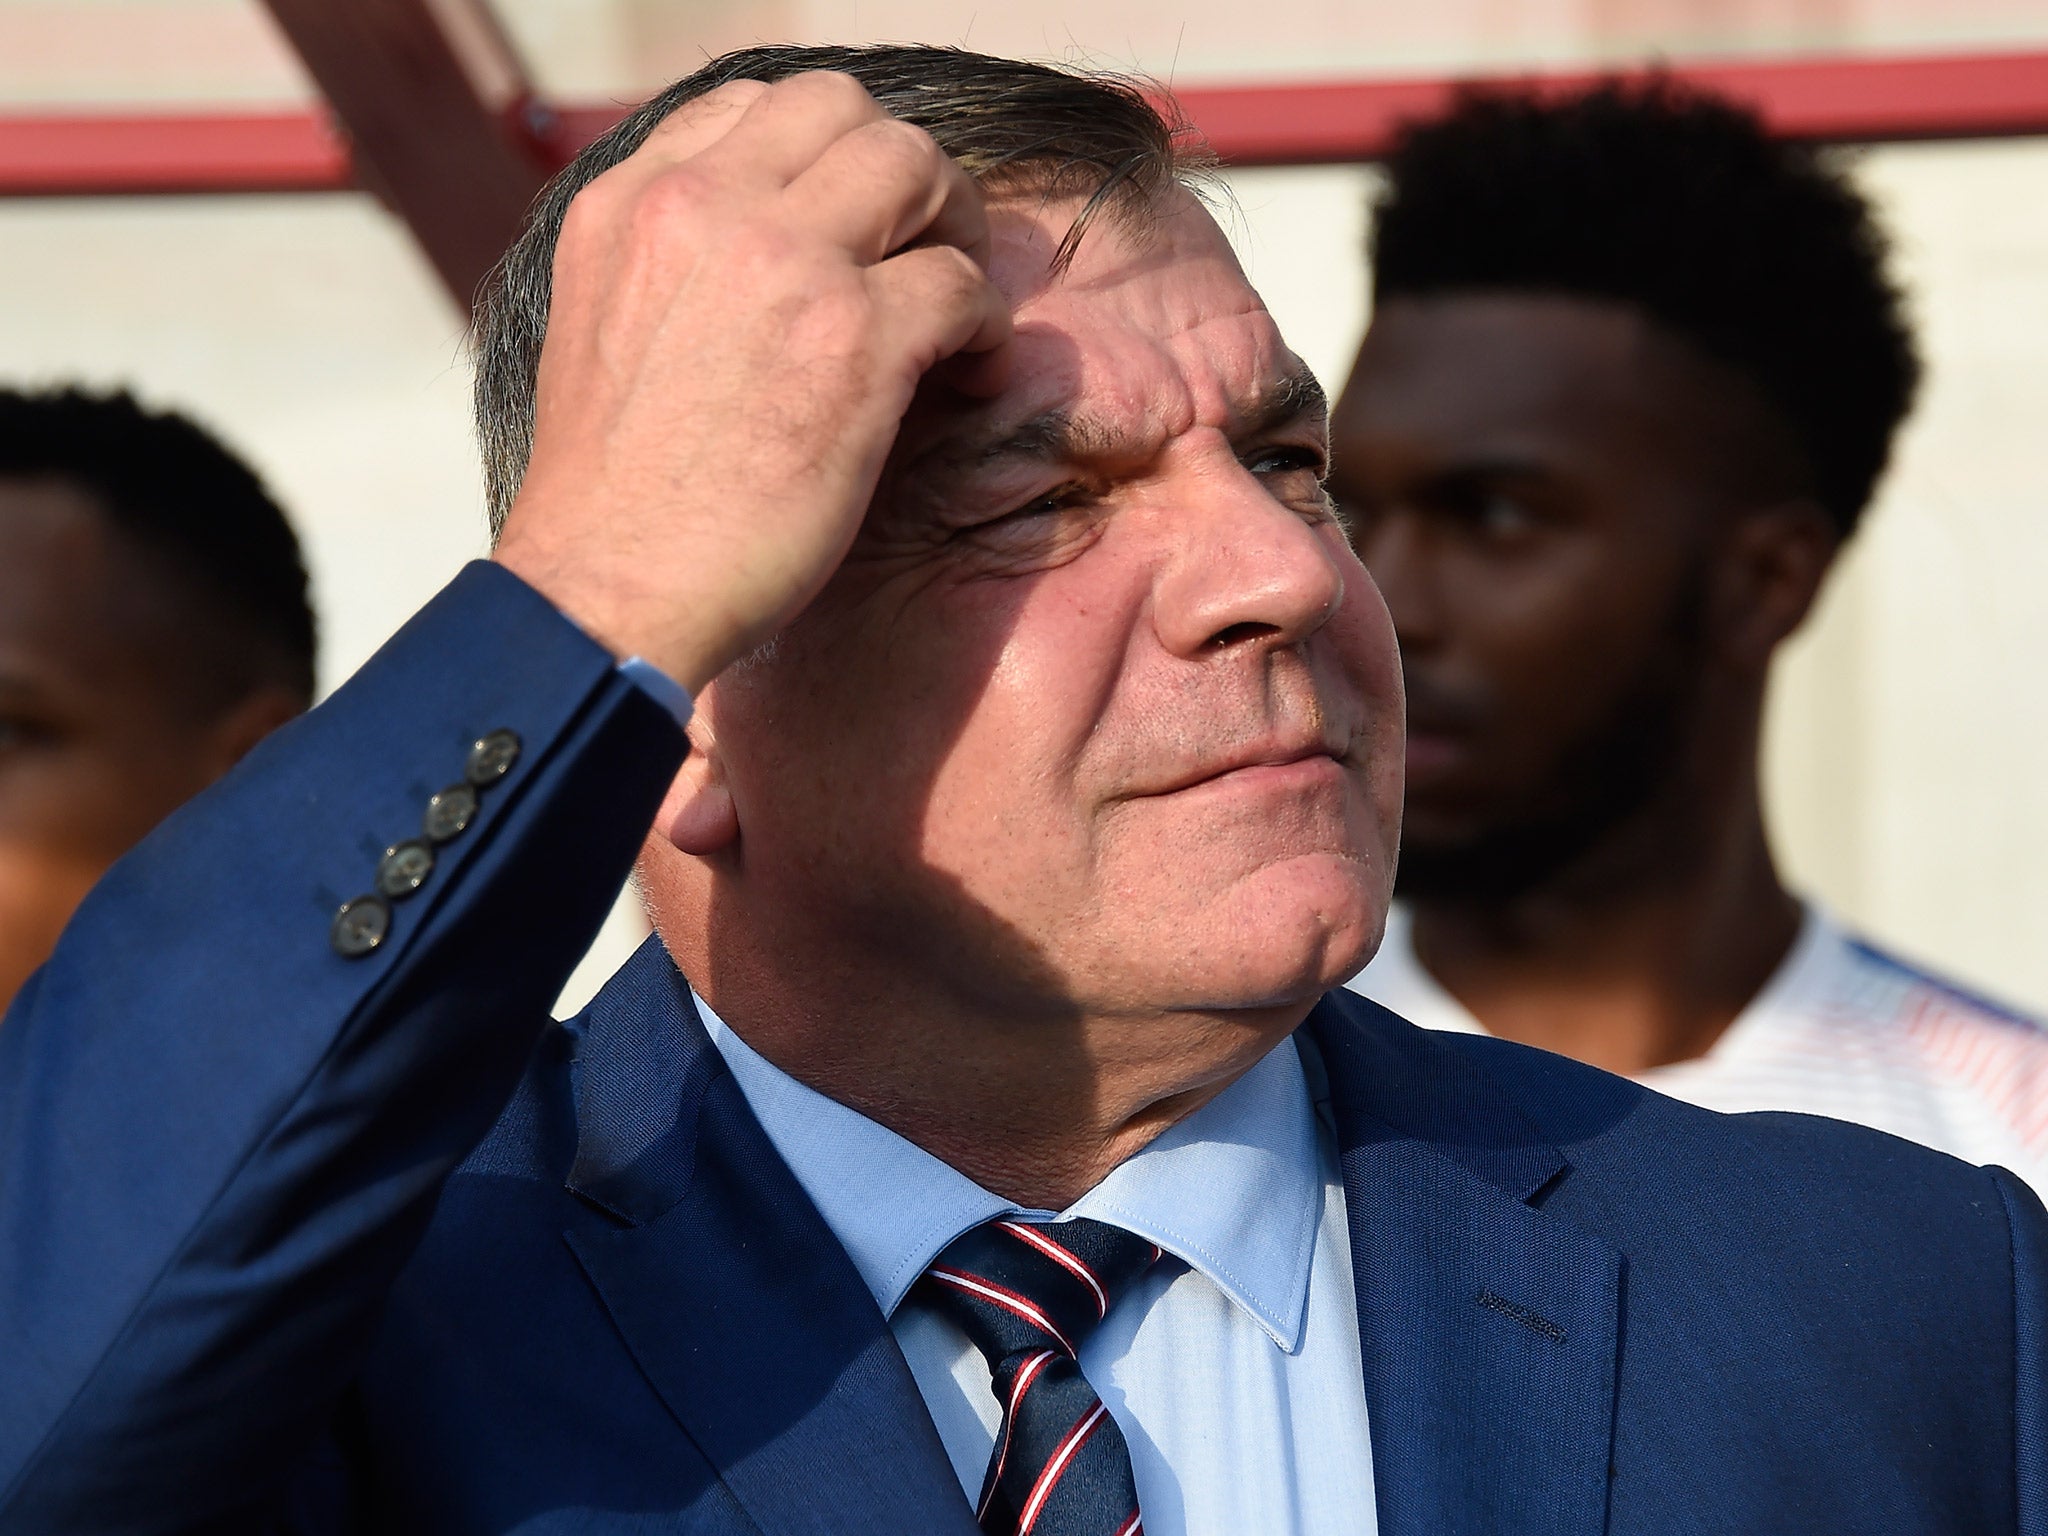 Sam Allardyce was given a lucky coin before England's 1-0 win